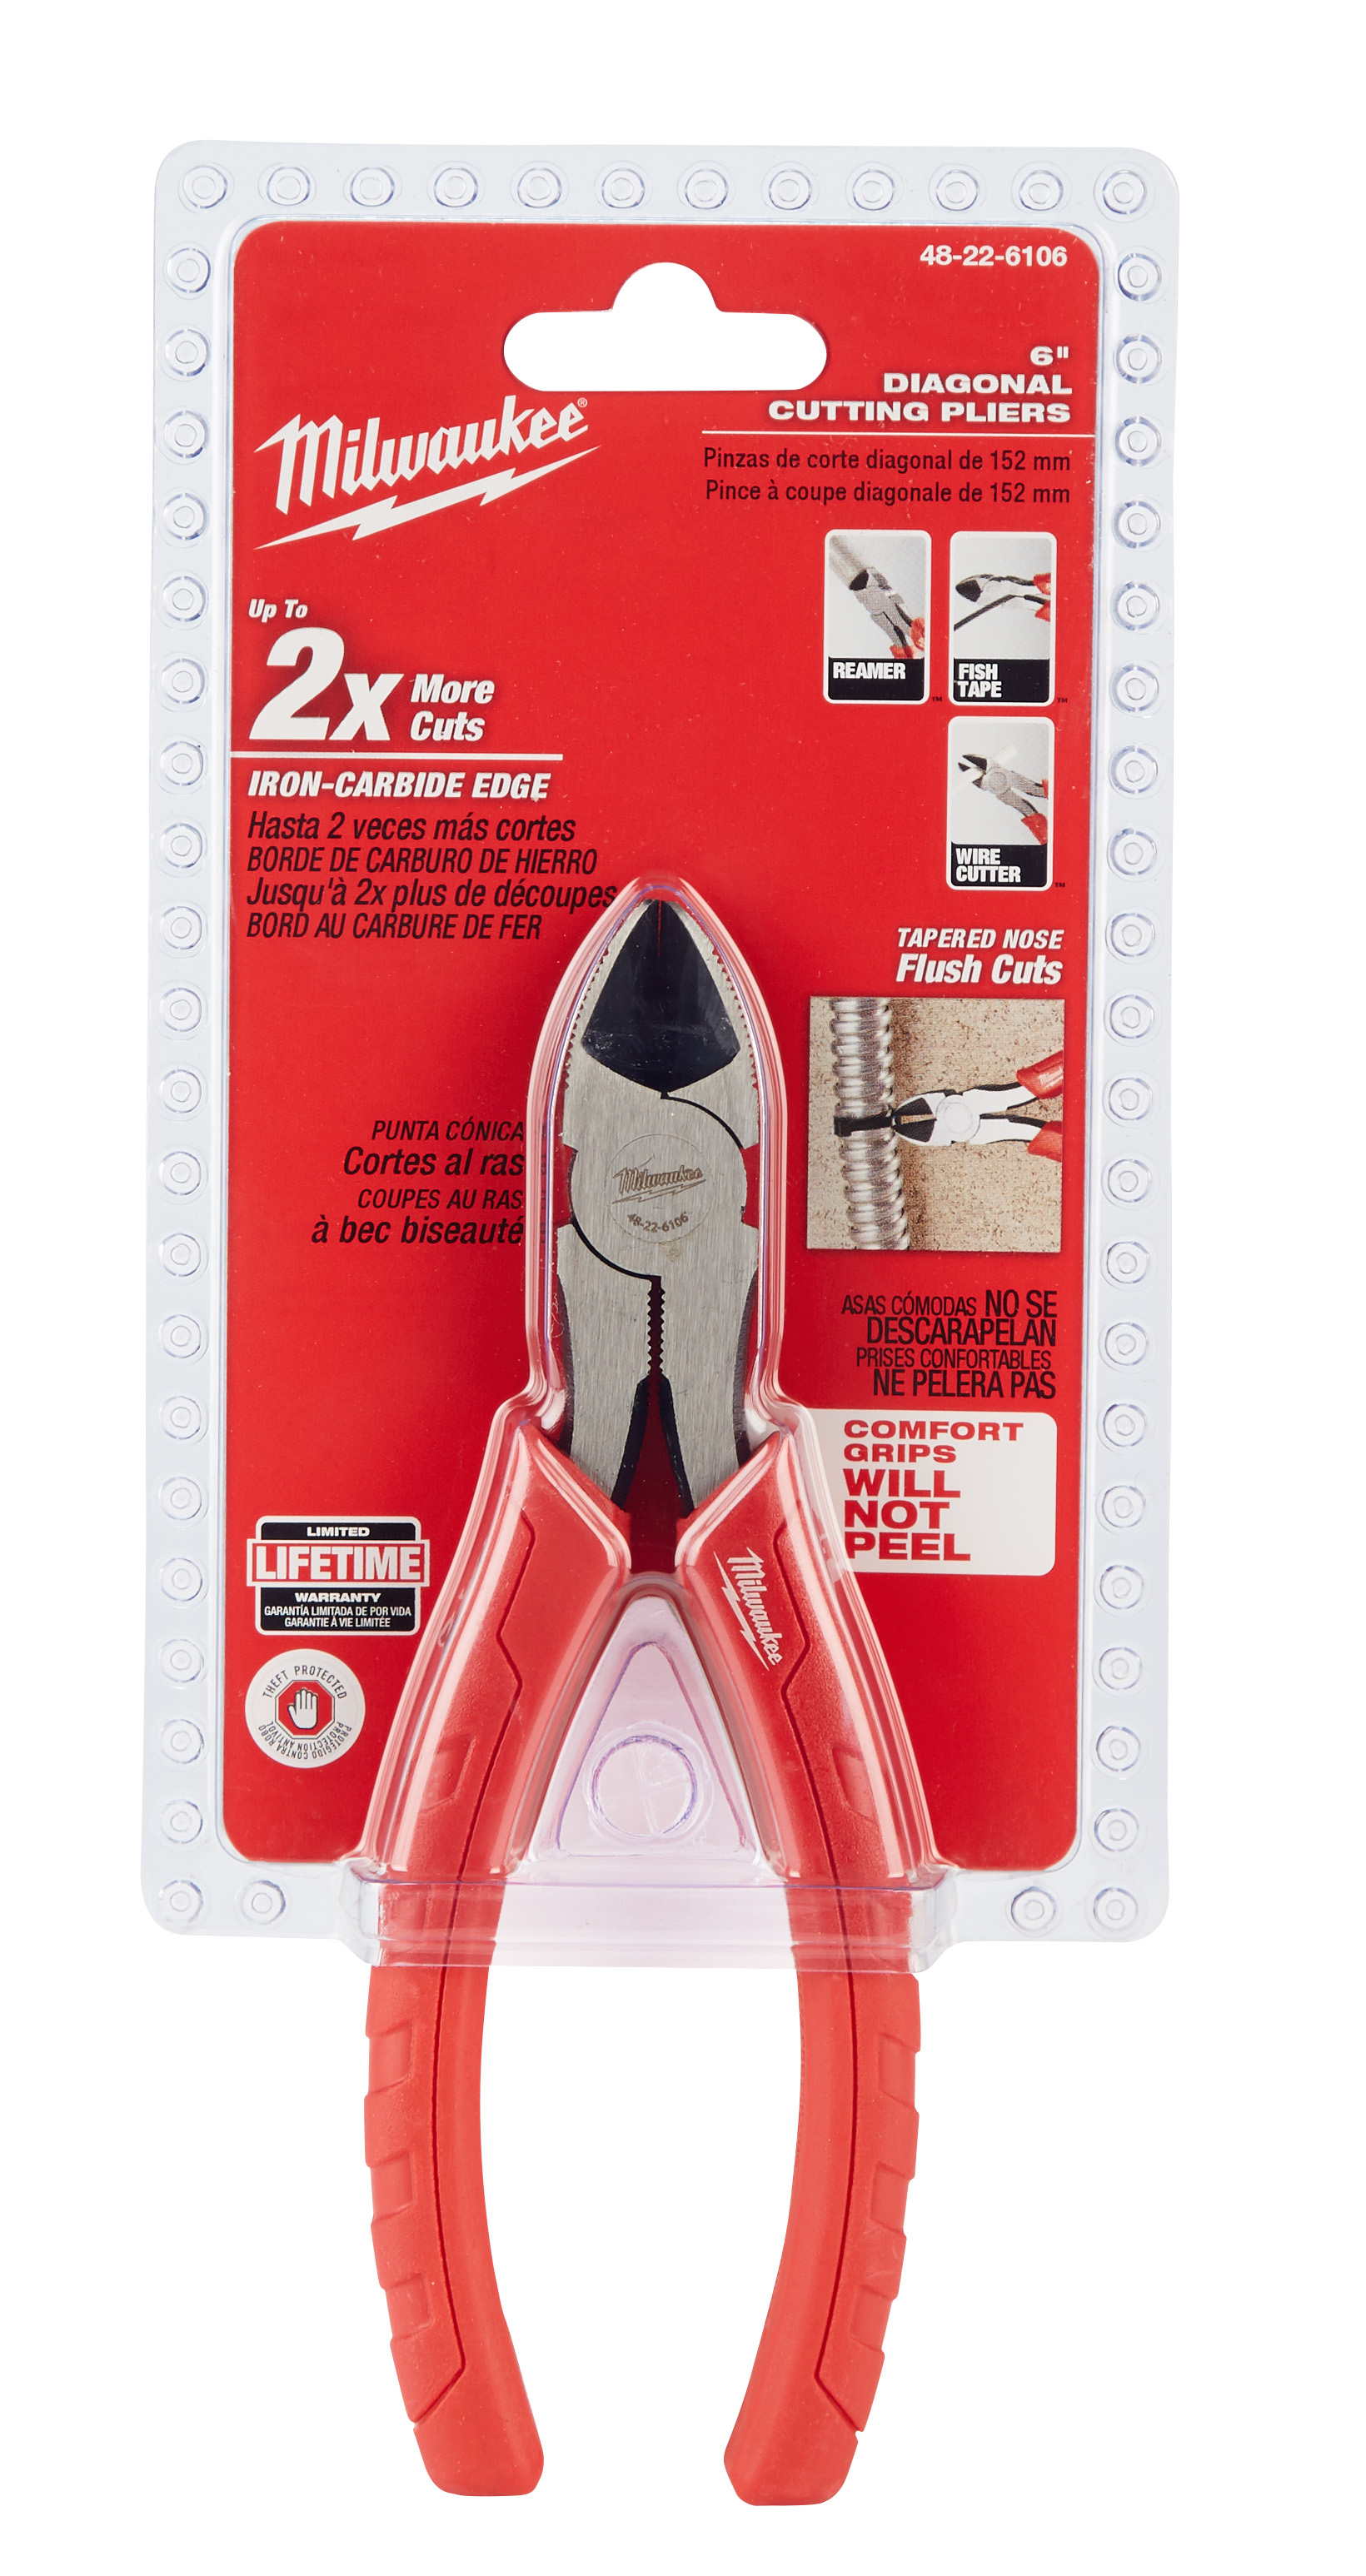 The Milwaukee® 6 in. diagonal cutting pliers feature iron Carbide edge hardened cutting edges for up to 2X more cuts and a tapered nose with flush cutting blades, which cut all the way to the tip. The pliers’ head features integrated reaming ridges (patent pending) for removing burrs from the inside of smooth pipe. For added functionality, the Milwaukee® 6 in. diagonal cutting pliers features an integrated fish tape puller. Milwaukee® pliers feature over-molded comfort grips, which will not peel under jobsite conditions. All Milwaukee® pliers are forged for strength and feature rust protection for long life.